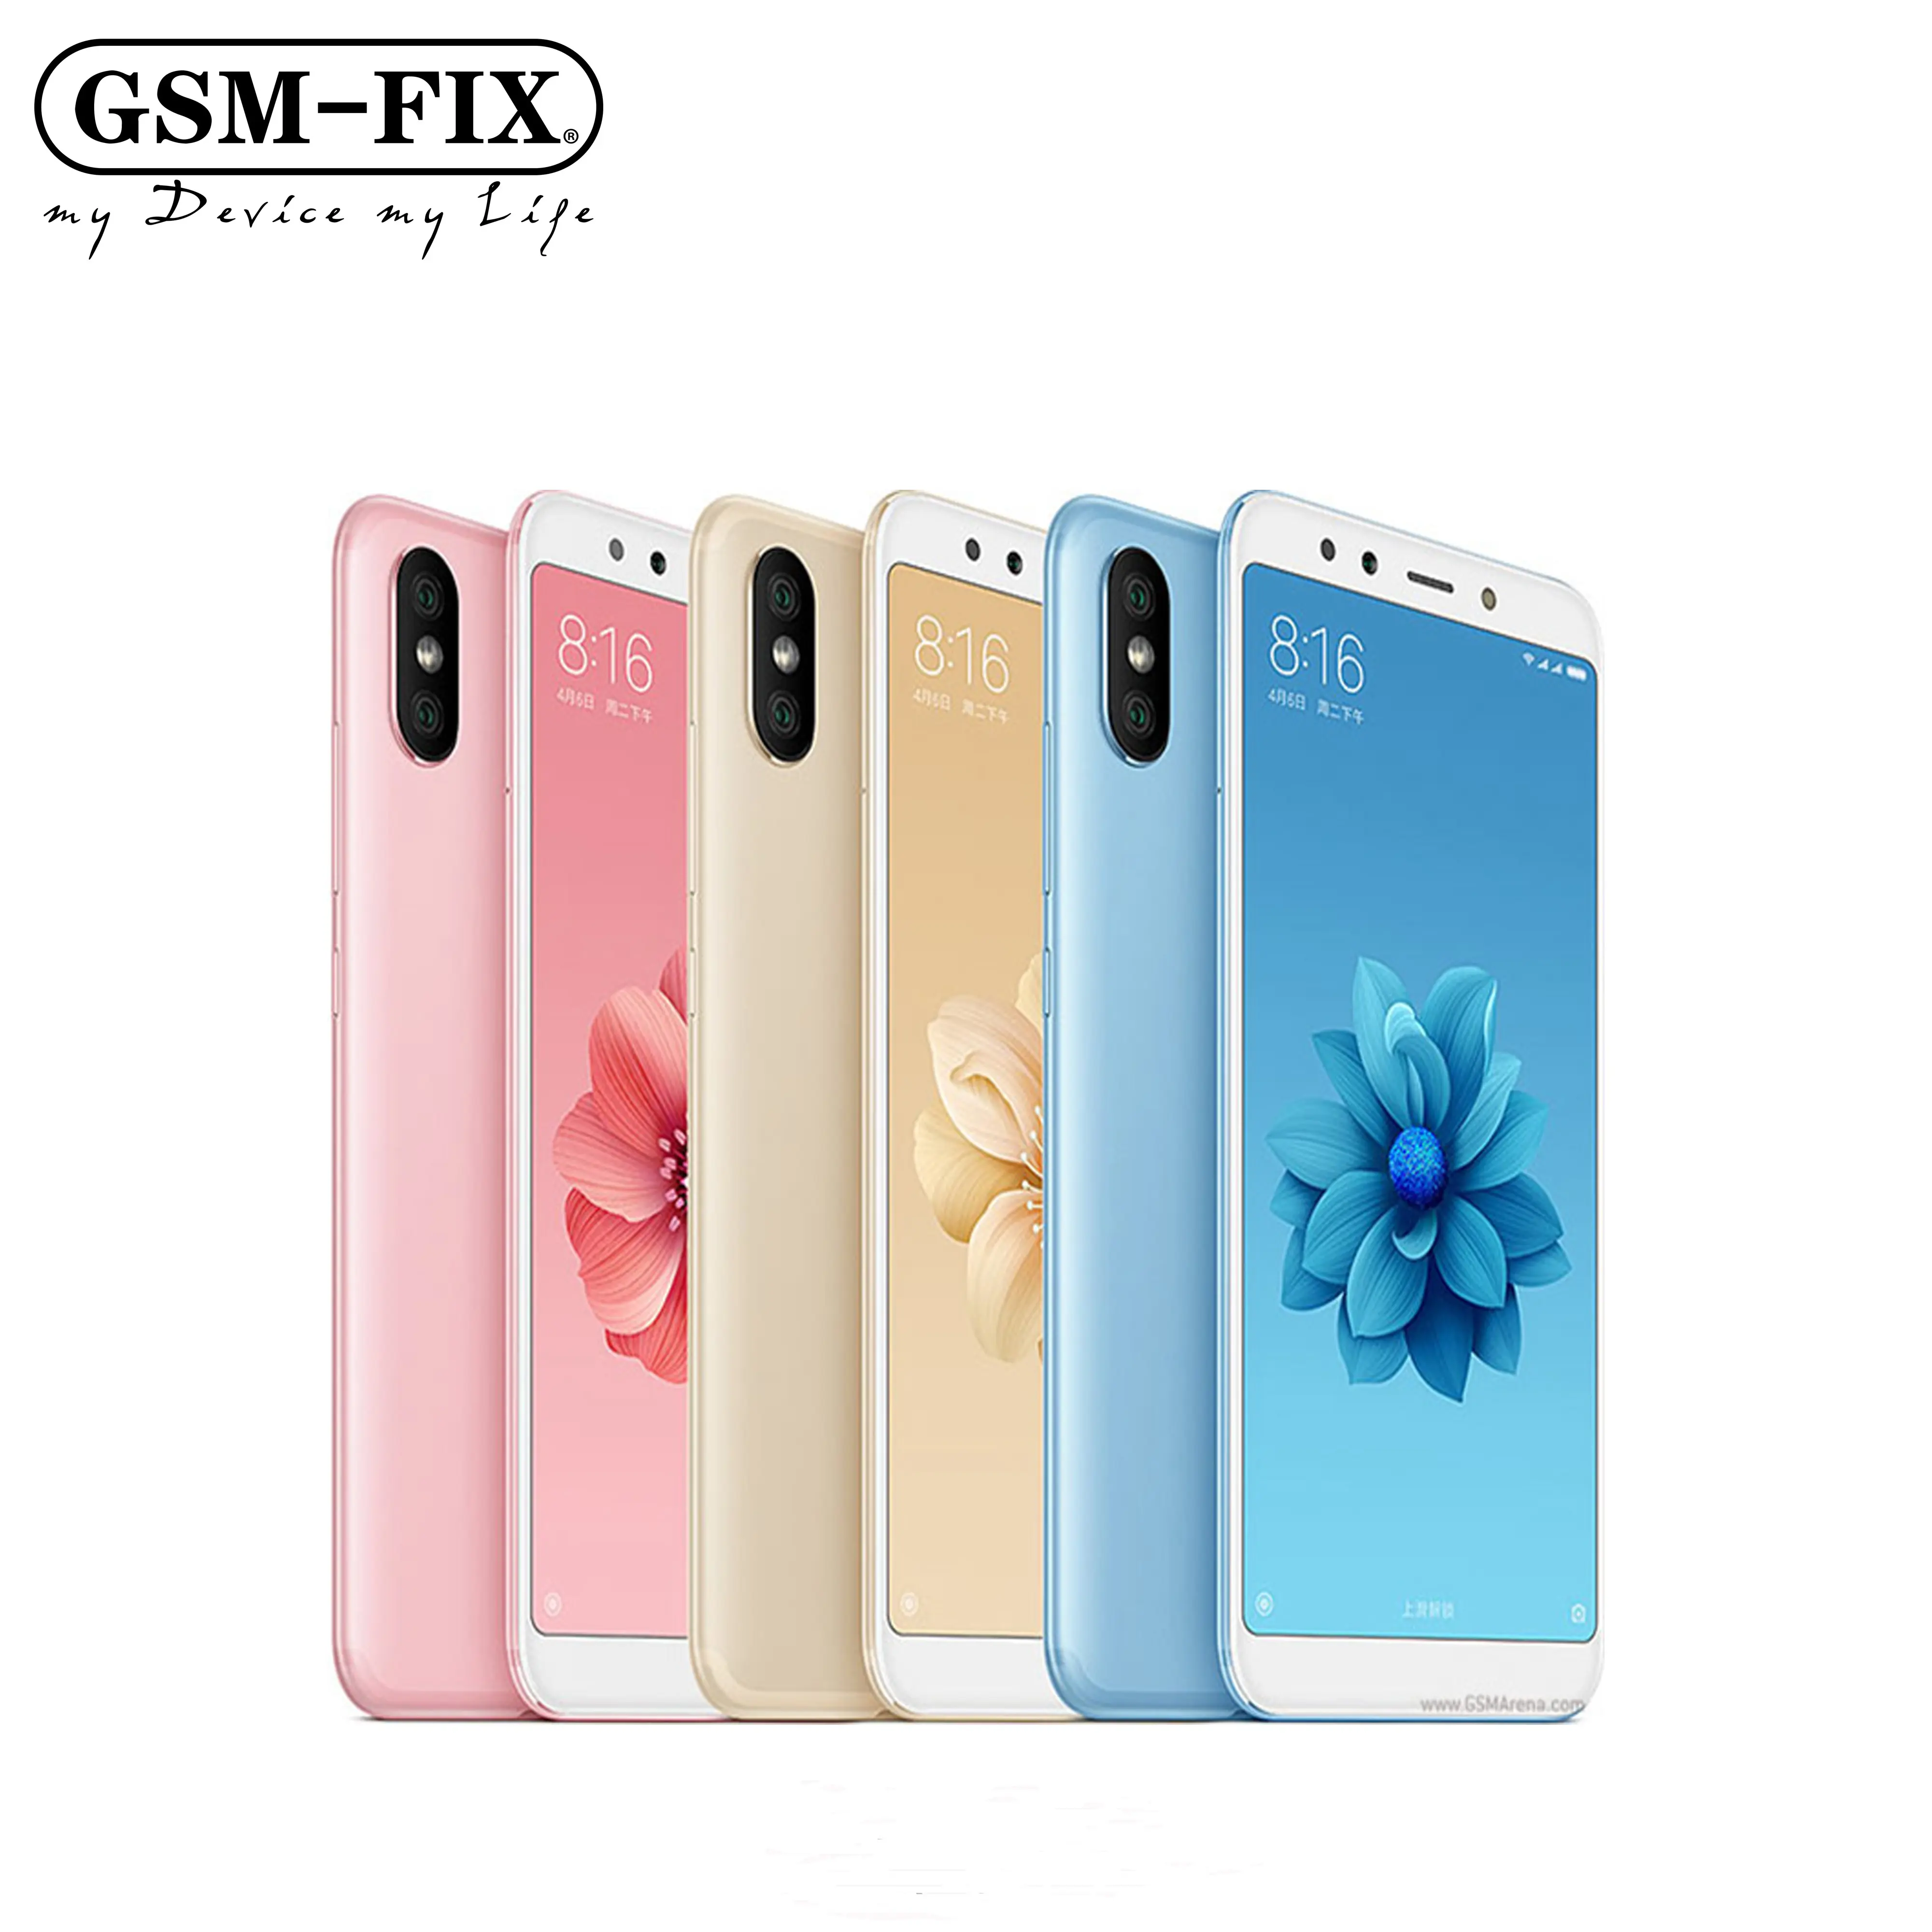 GSM-FIX Celular Global Version For Xiaomi Redmi Mi A2/6x Smartphone Straight Talk Cell Phones Unlock Android Mobilephone